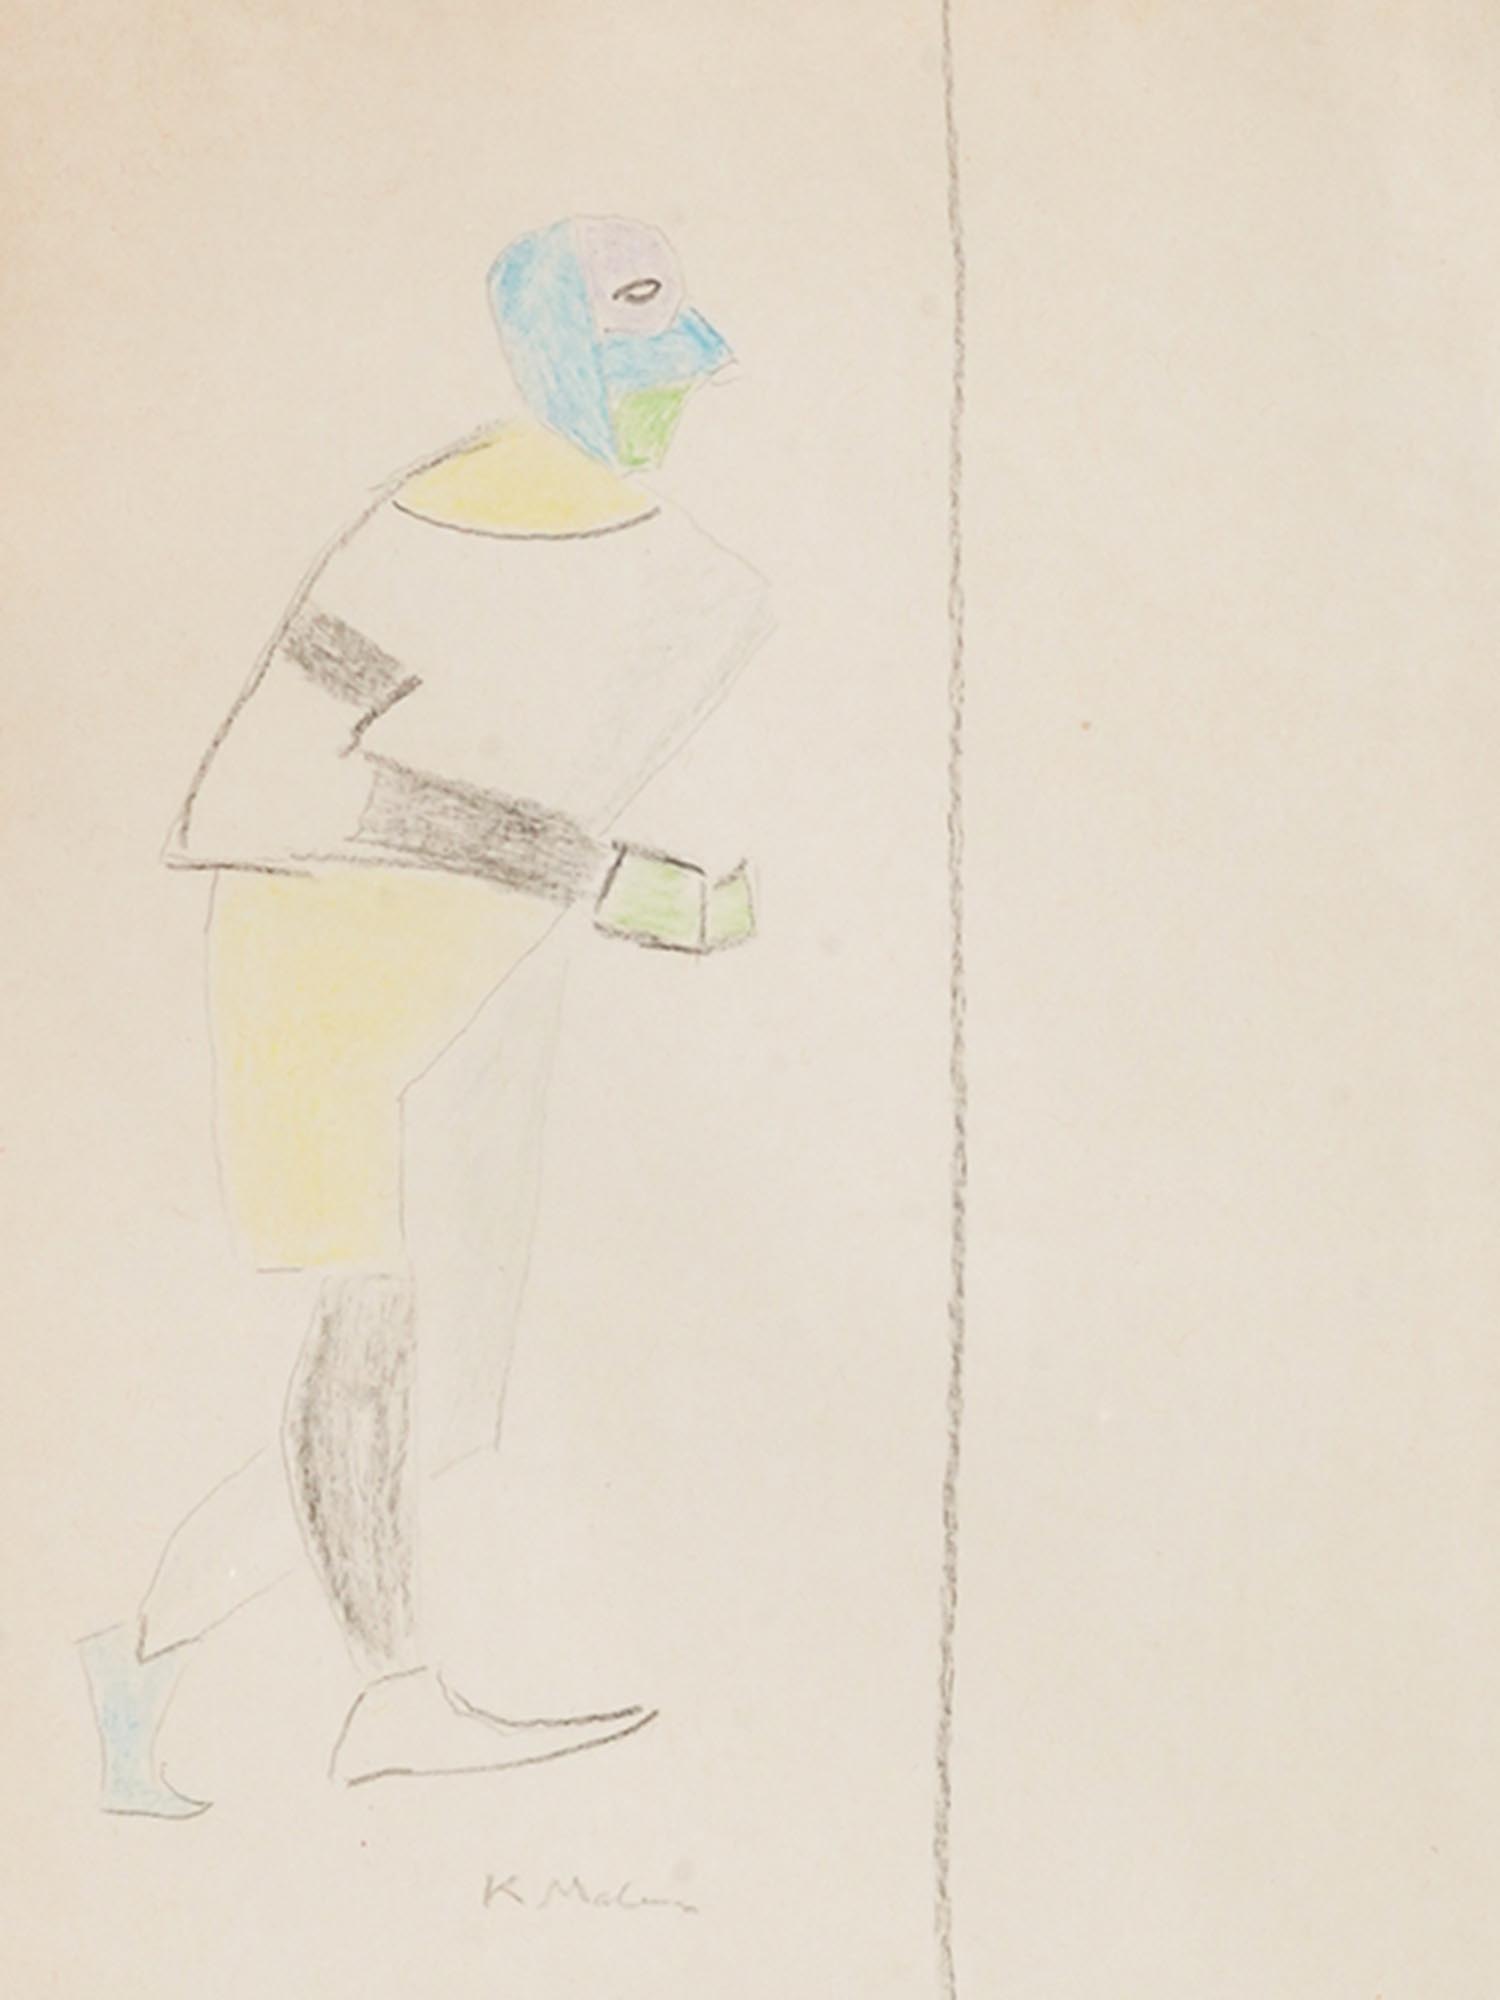 RUSSIAN COSTUME DESIGN SKETCH BY KAZIMIR MALEVICH PIC-1